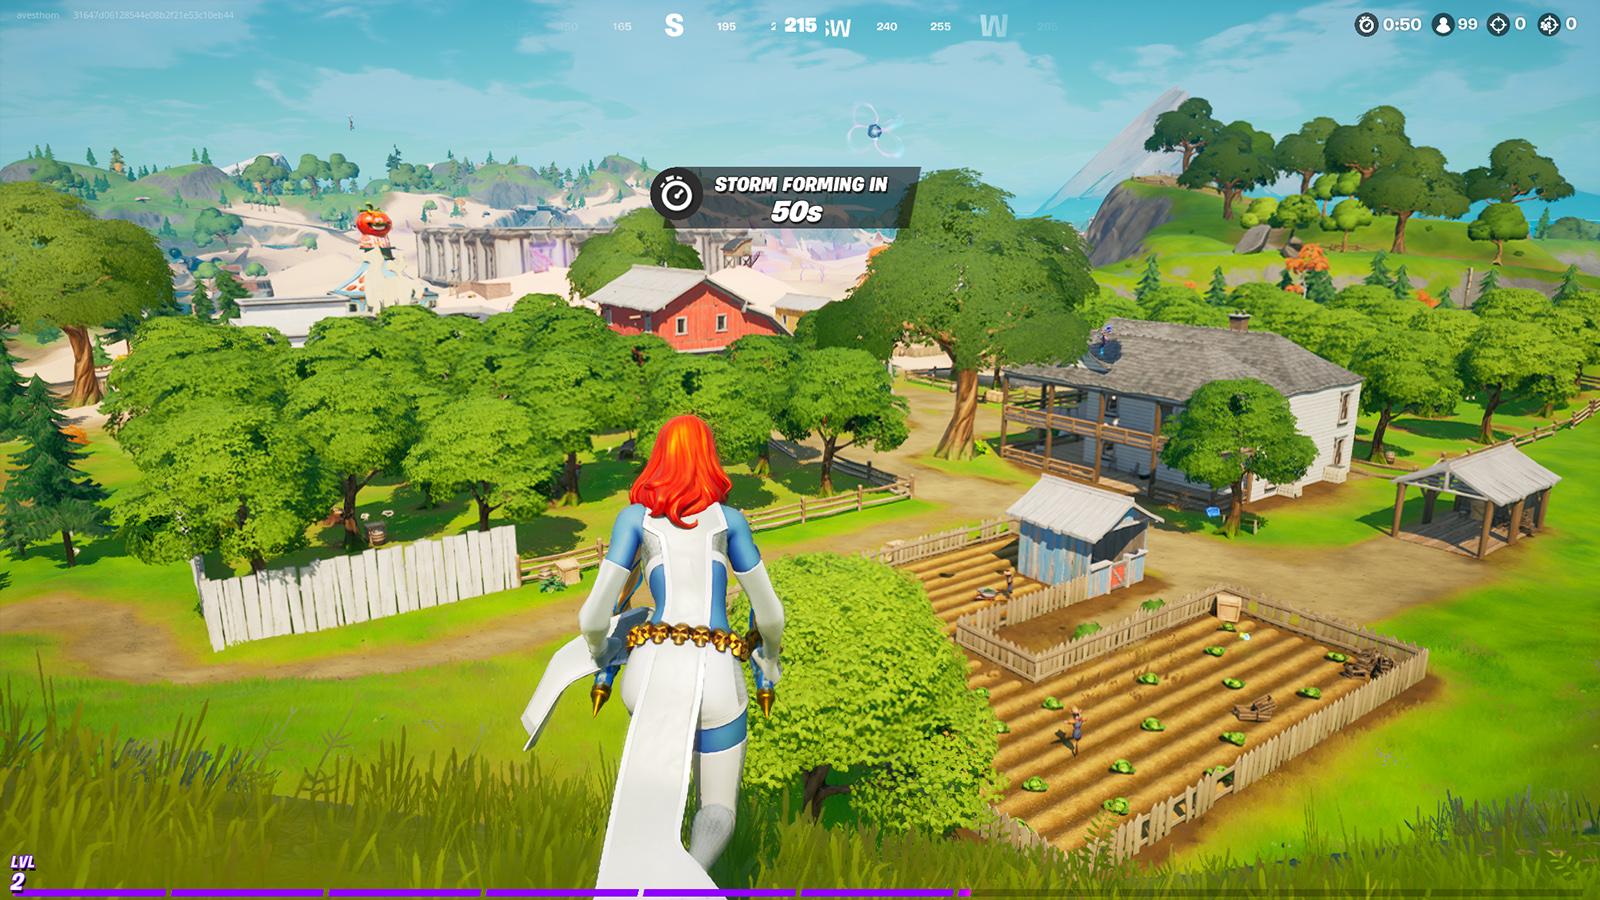 The Orchard, returning in Season 5 of Fortnite's Chapter 2